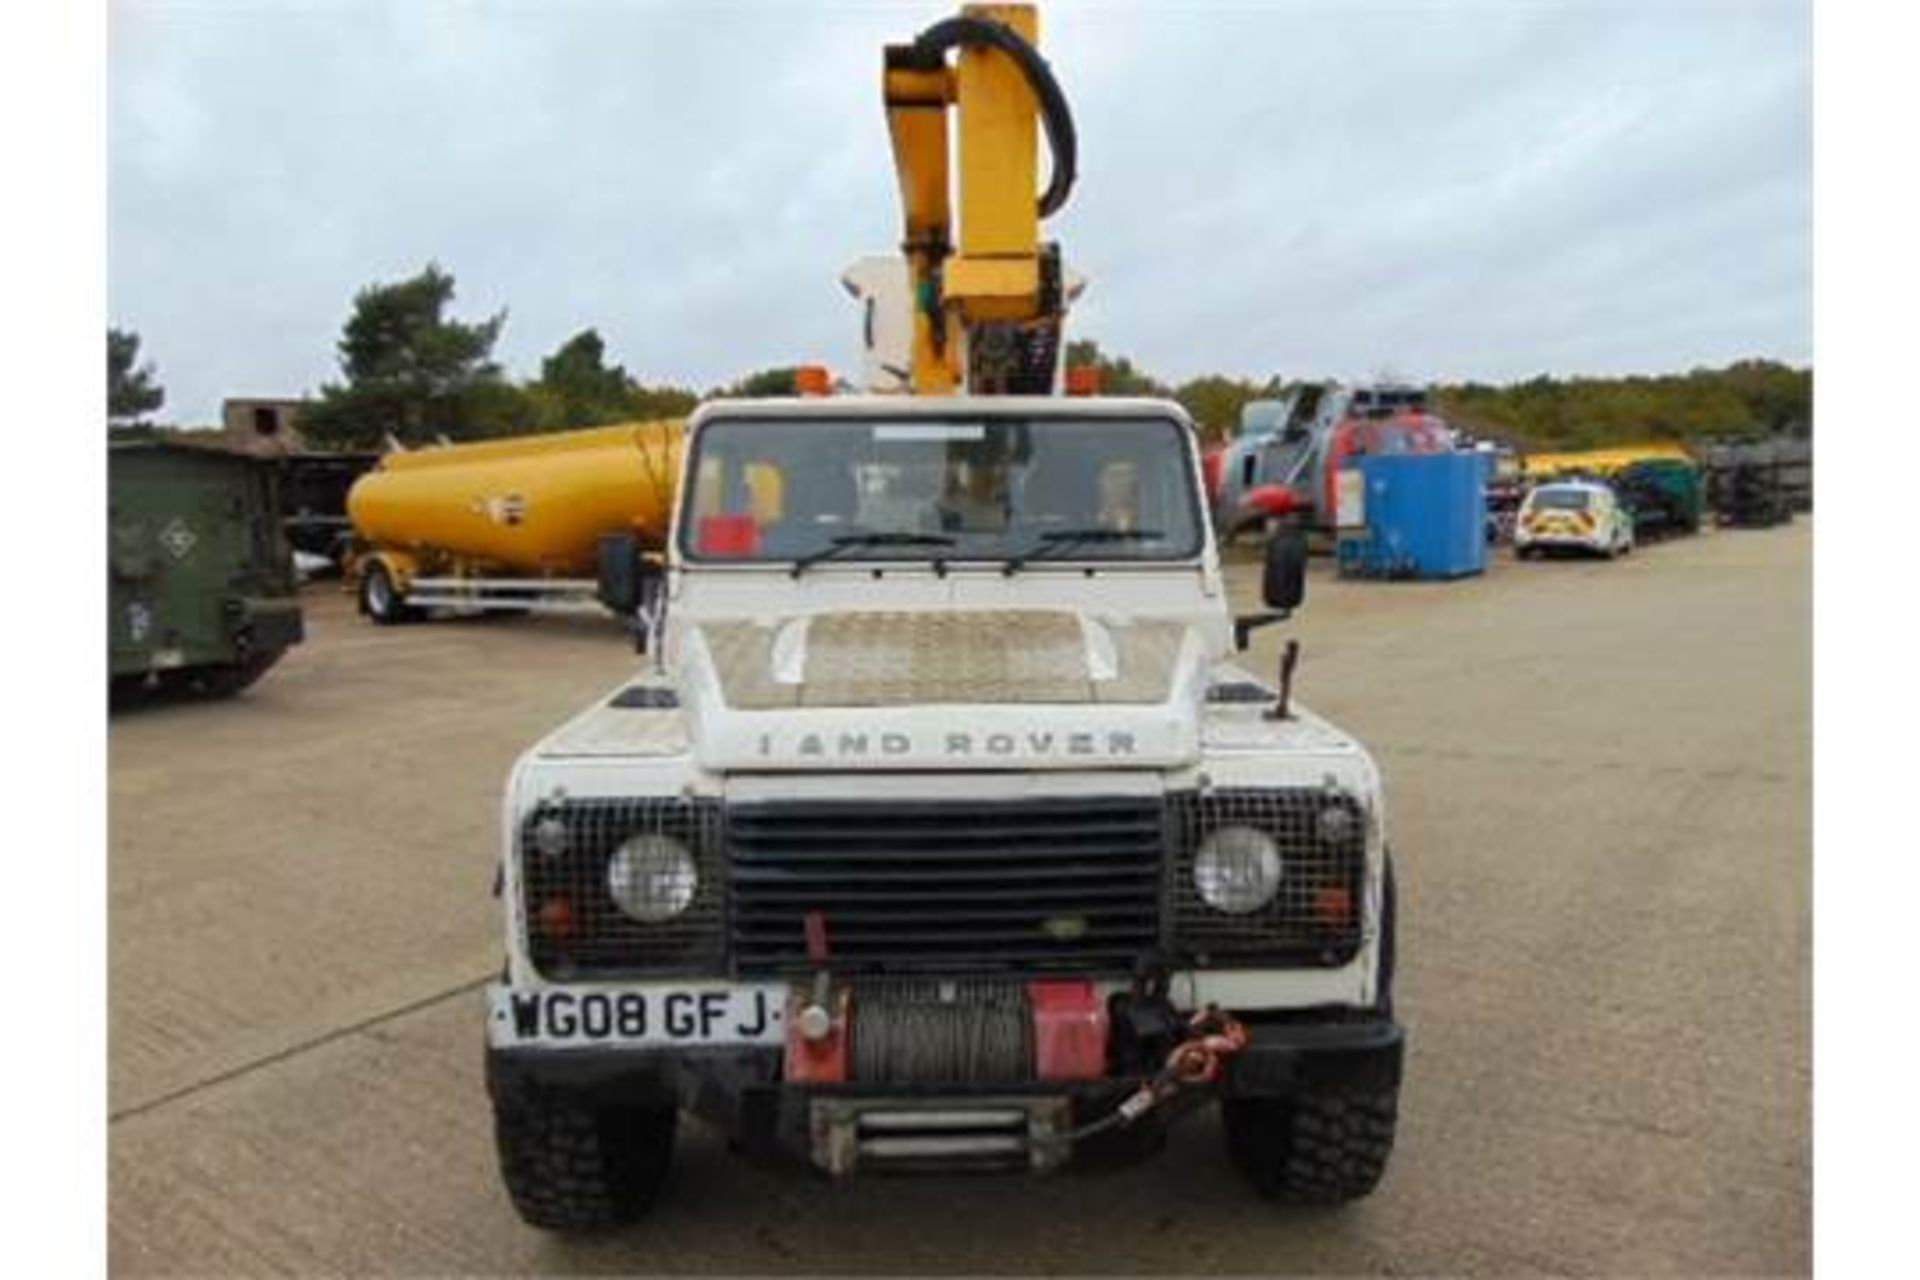 Land Rover Defender 110 High Capacity Cherry Picker - Image 5 of 34